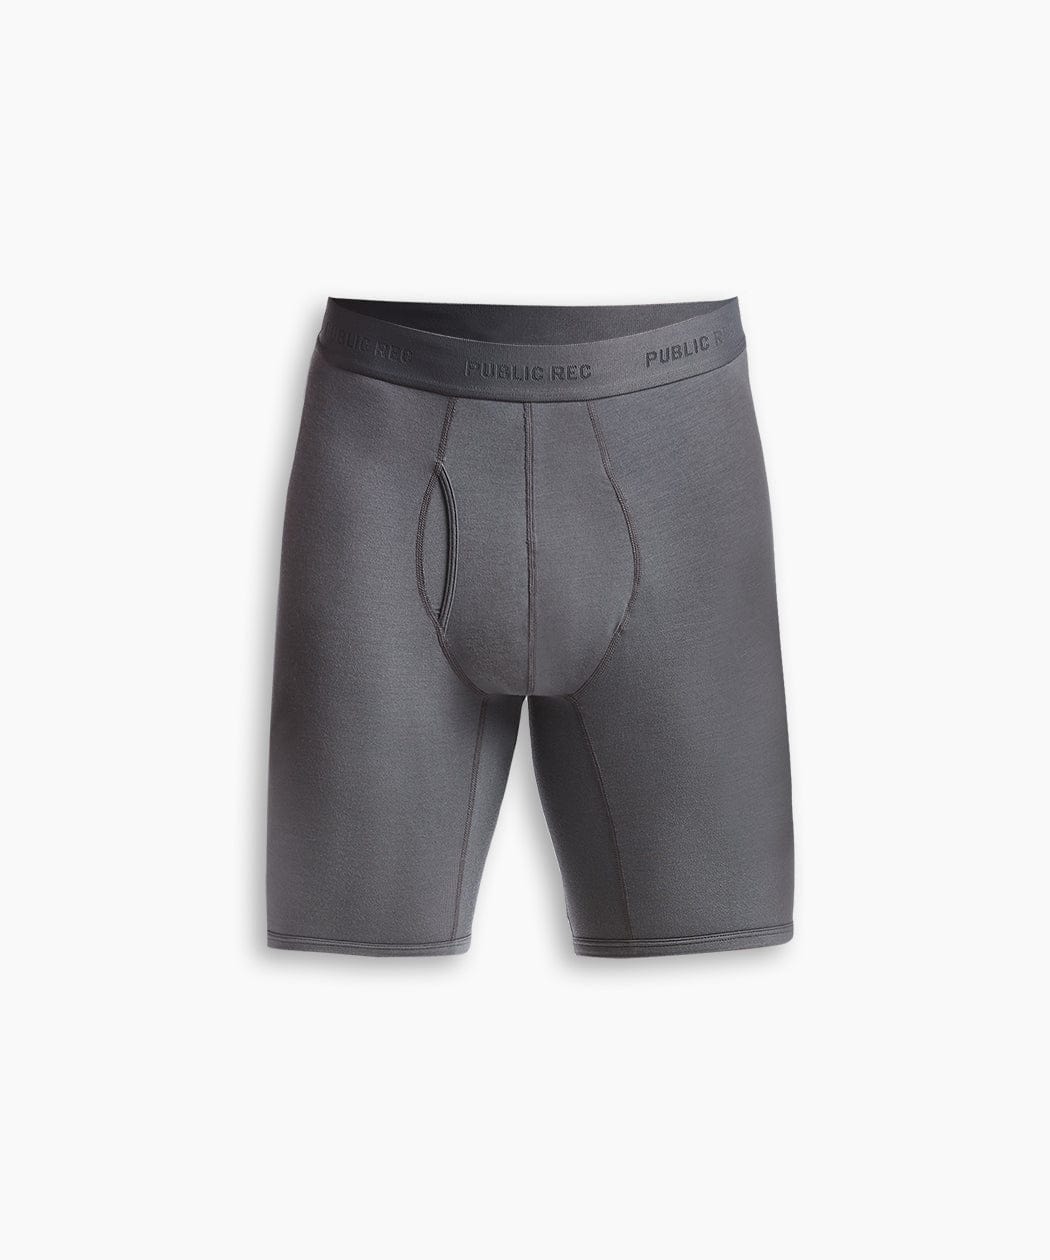 Barely There Boxer Brief, Men's Nickel